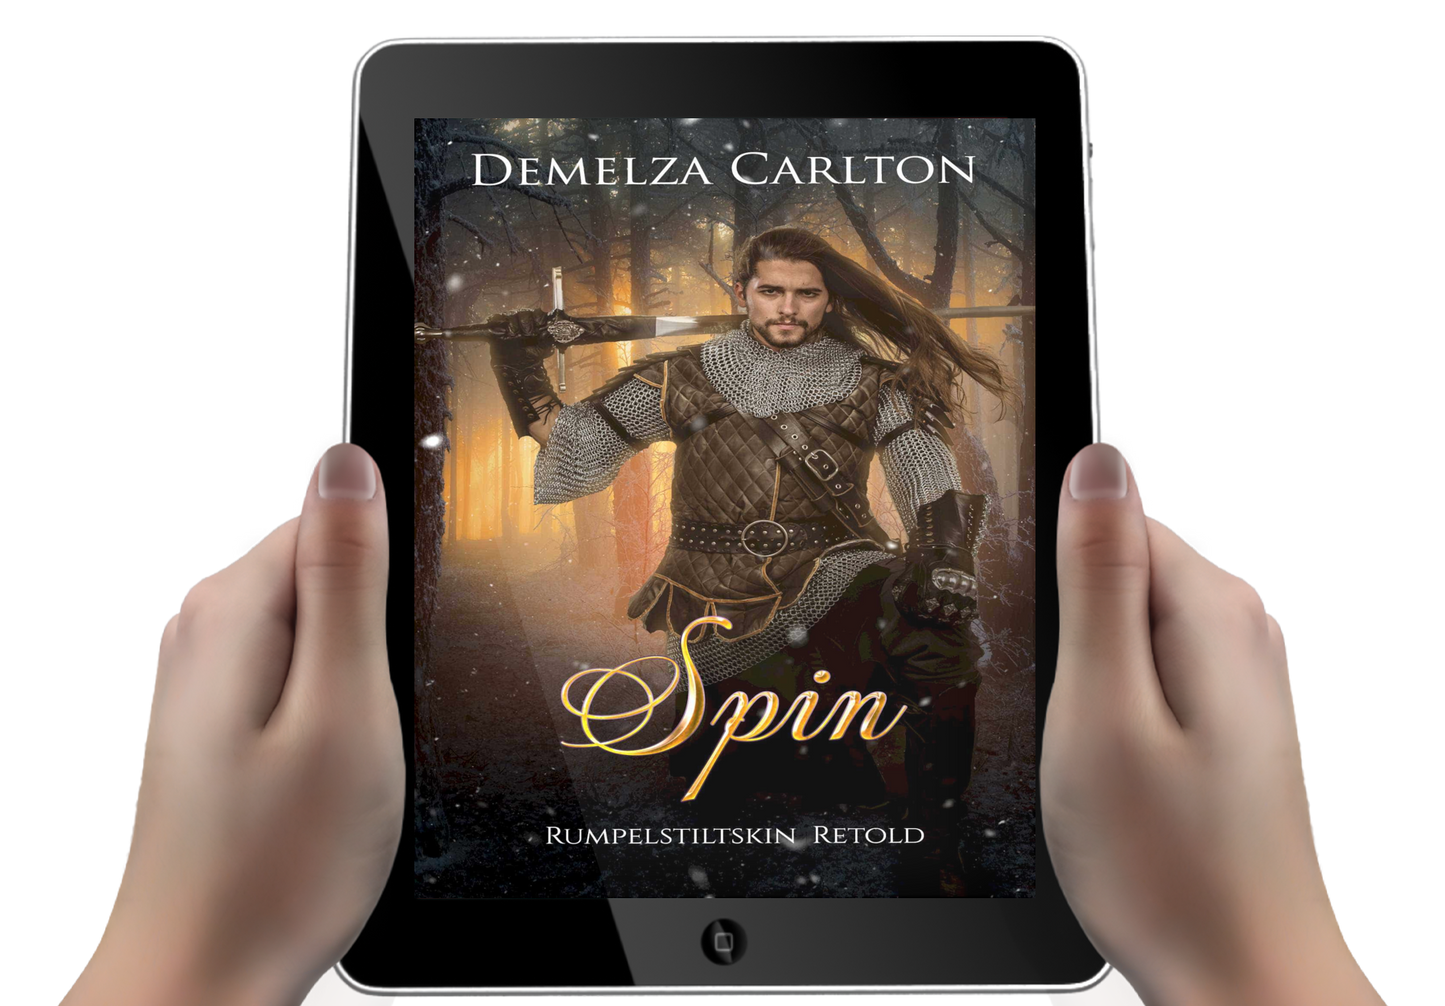 Spin: Rumpelstiltskin Retold Book 13 in the Romance a Medieval Fairytale series by USA Today Bestselling Author Demelza Carlton ebook